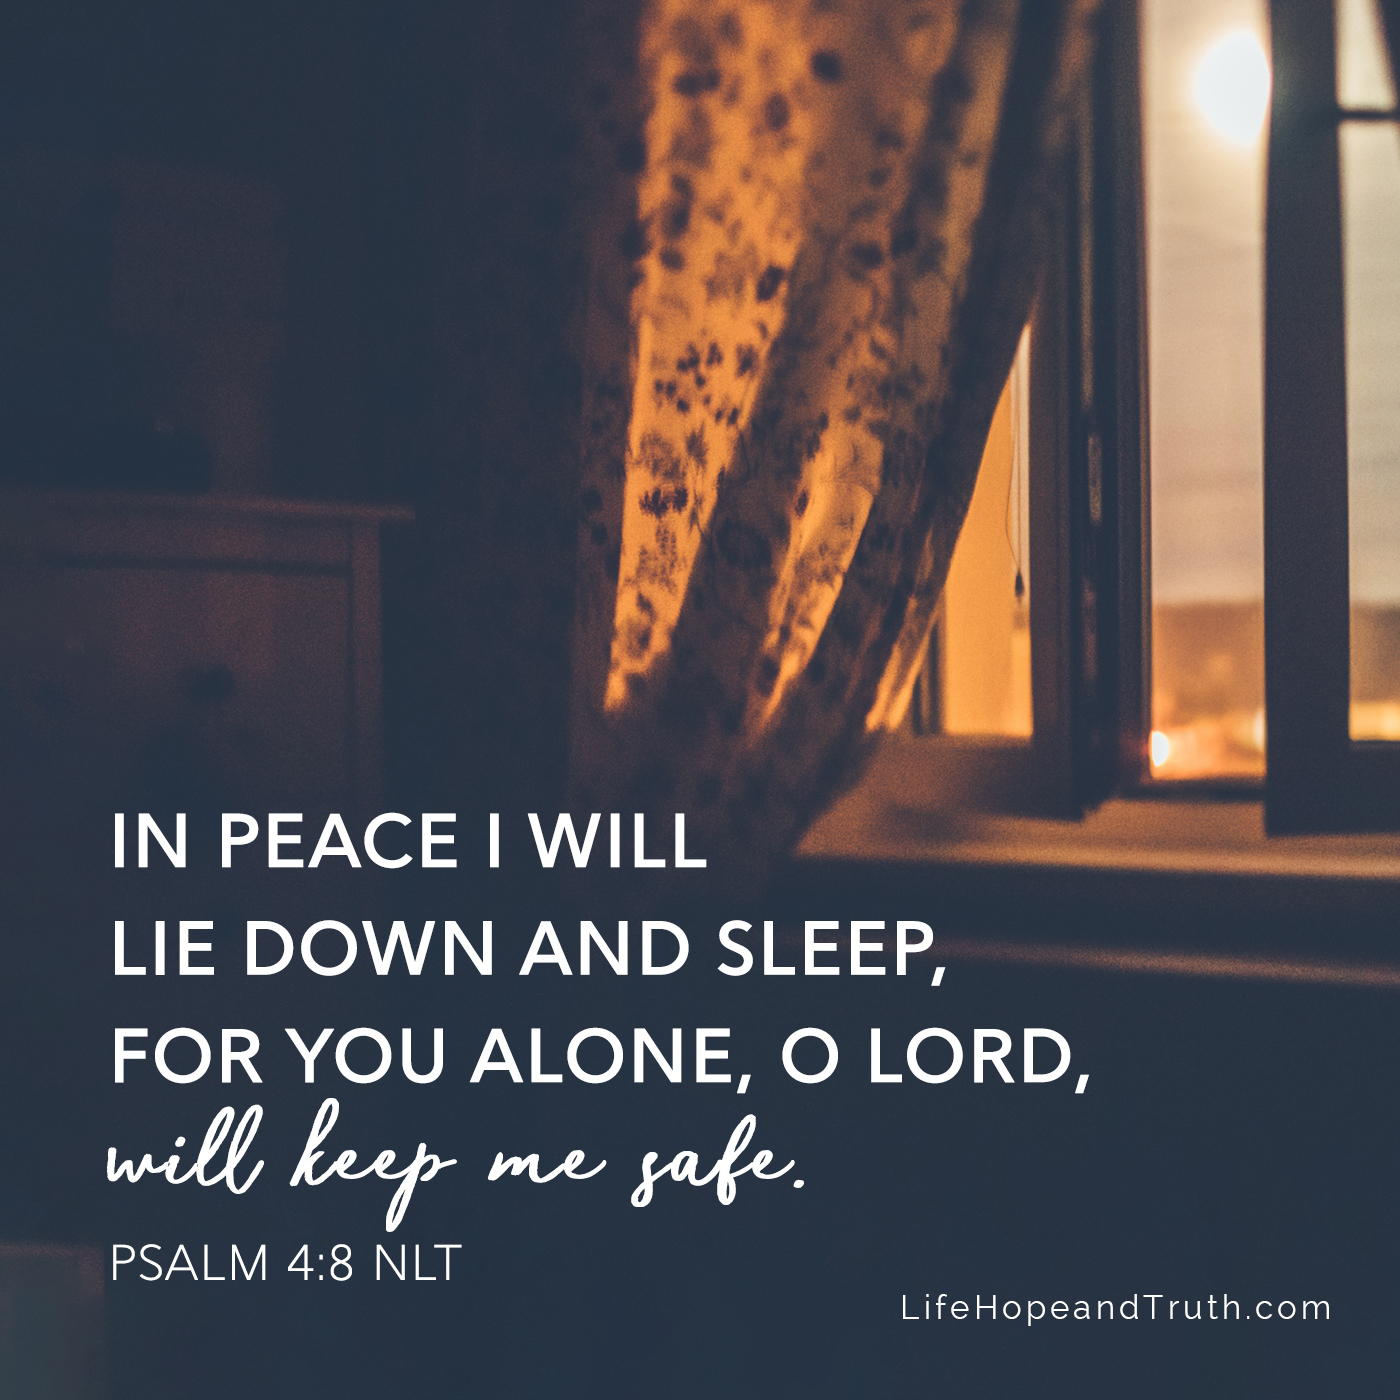 Lie down and sleep, for You alone, O Lord, will keep me safe.